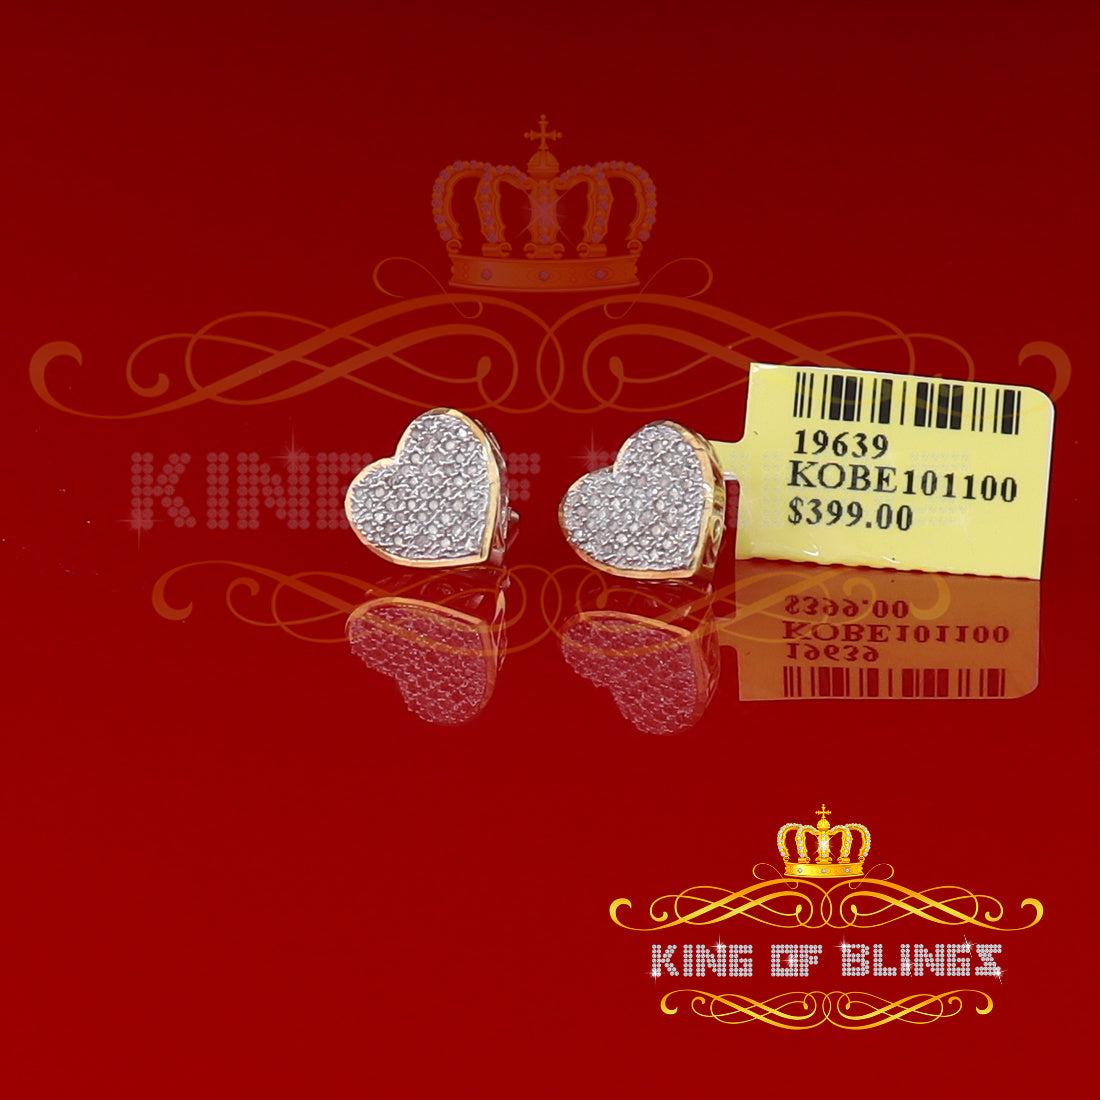 King of Blings-Aretes Para Hombre Heart 925 Yellow Silver 0.20ct Diamond Women's /Gents Earring KING OF BLINGS